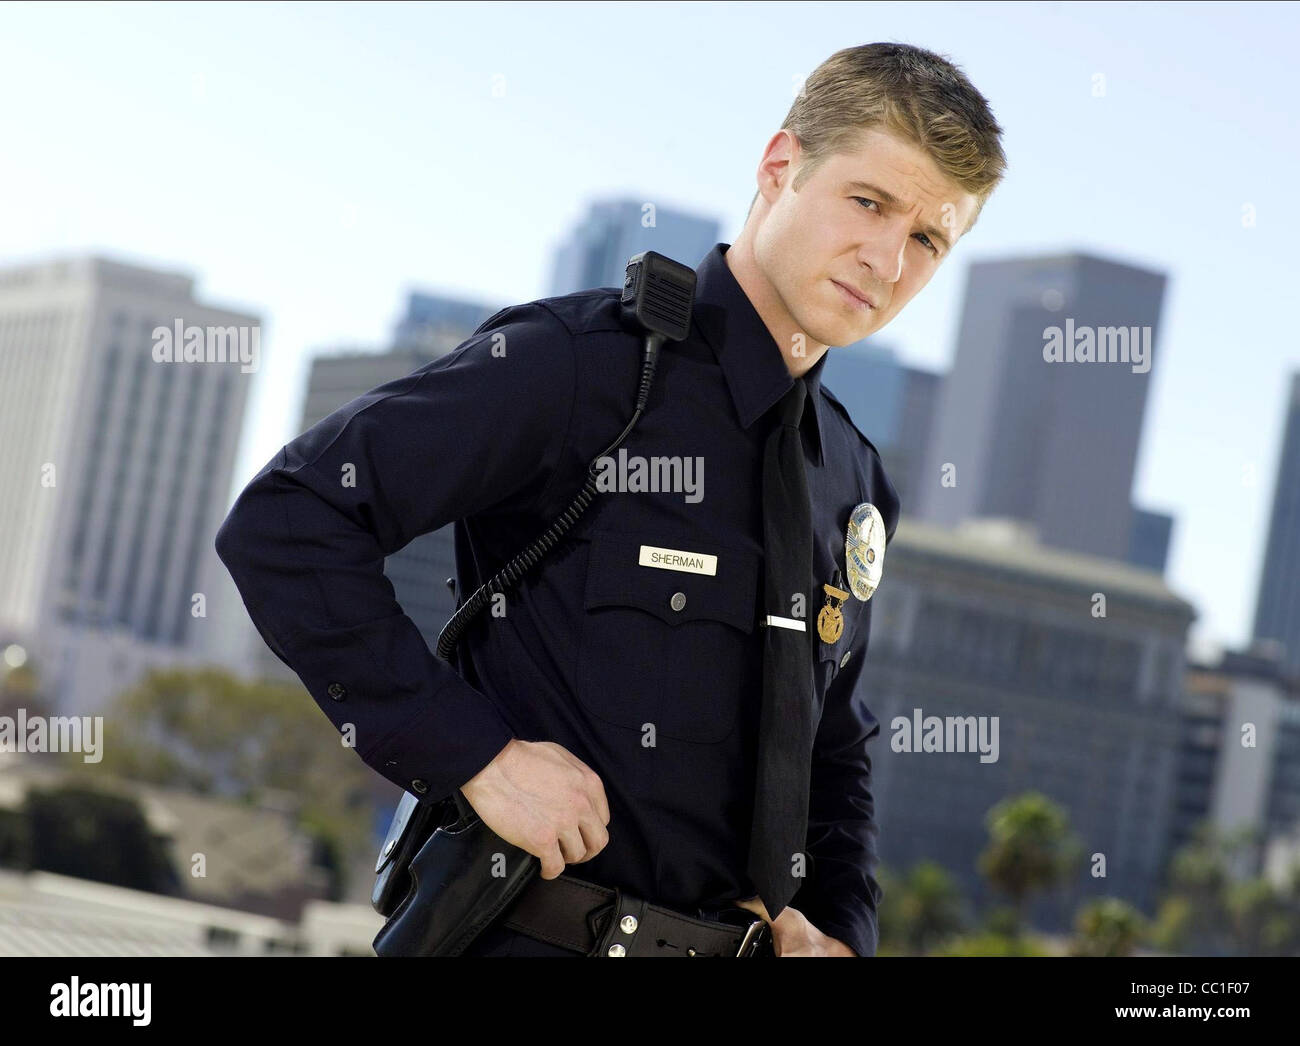 Officer Ben Sherman High Resolution Stock Photography and Images - Alamy